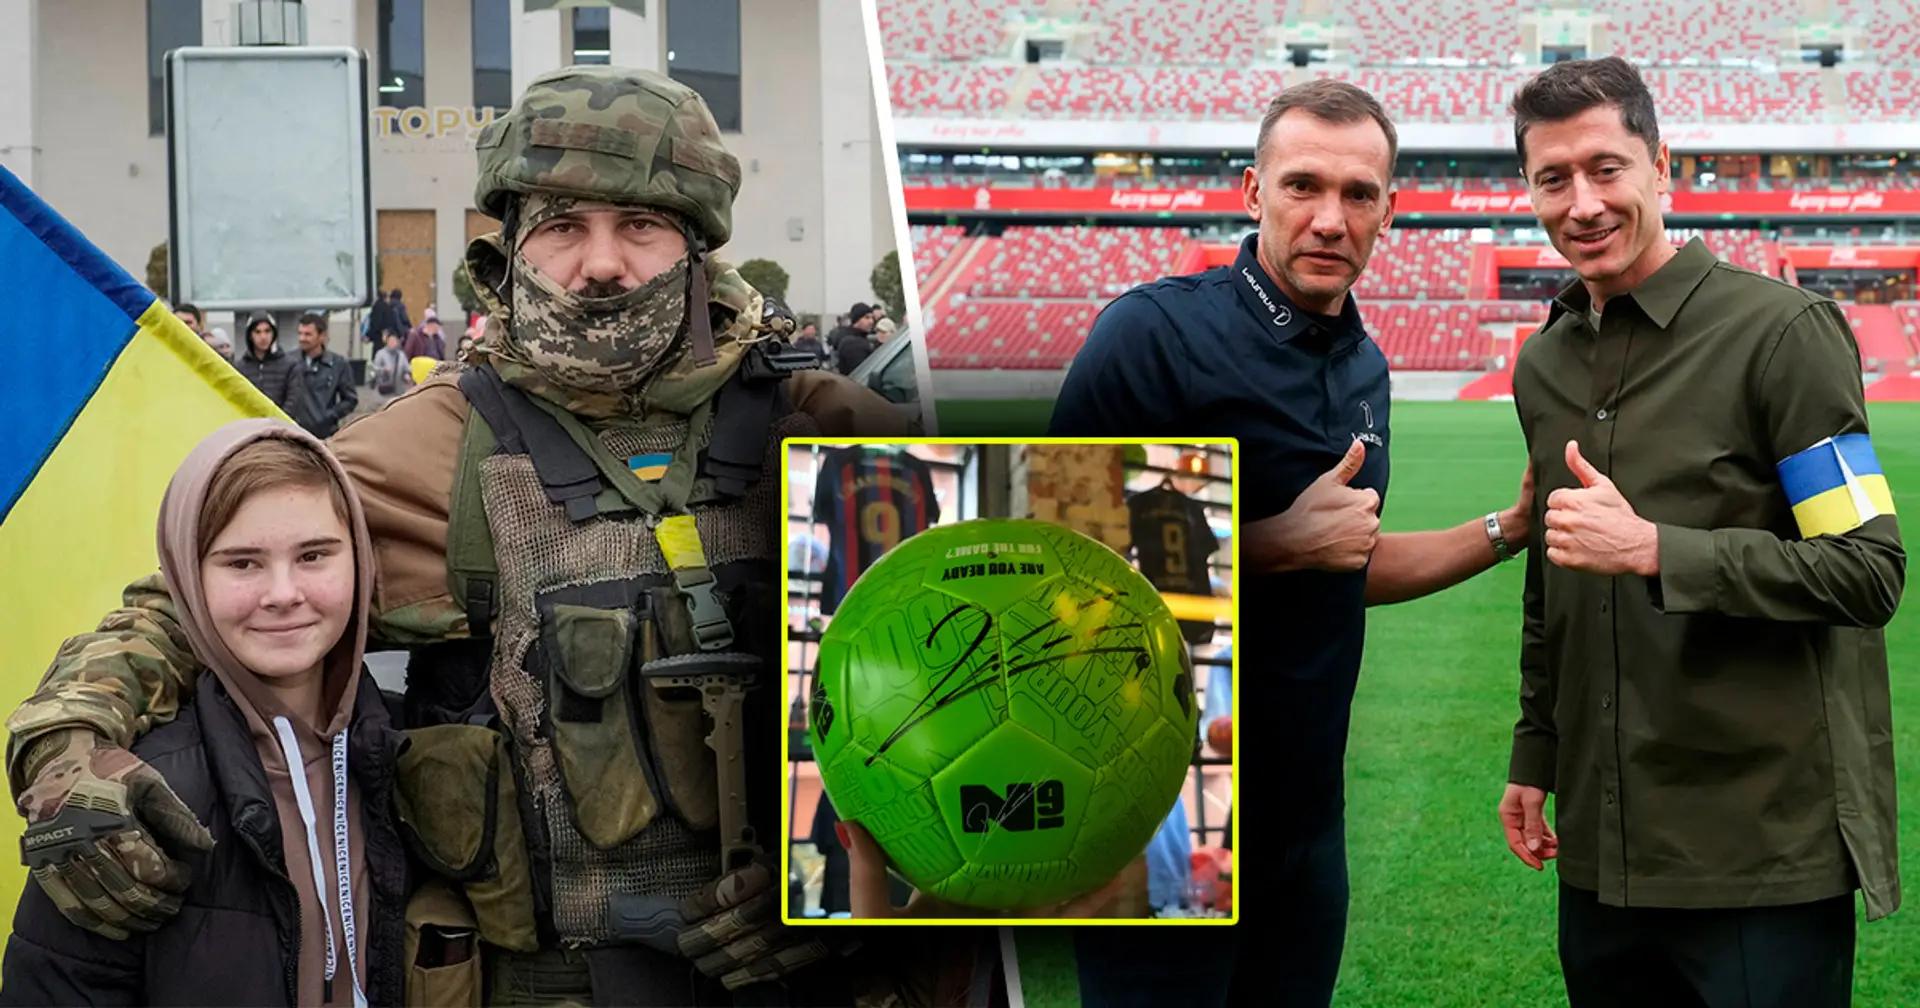 Tribuna.com launches fundraising campaign including auction with top athletes’ valuable items to support Ukrainian army 